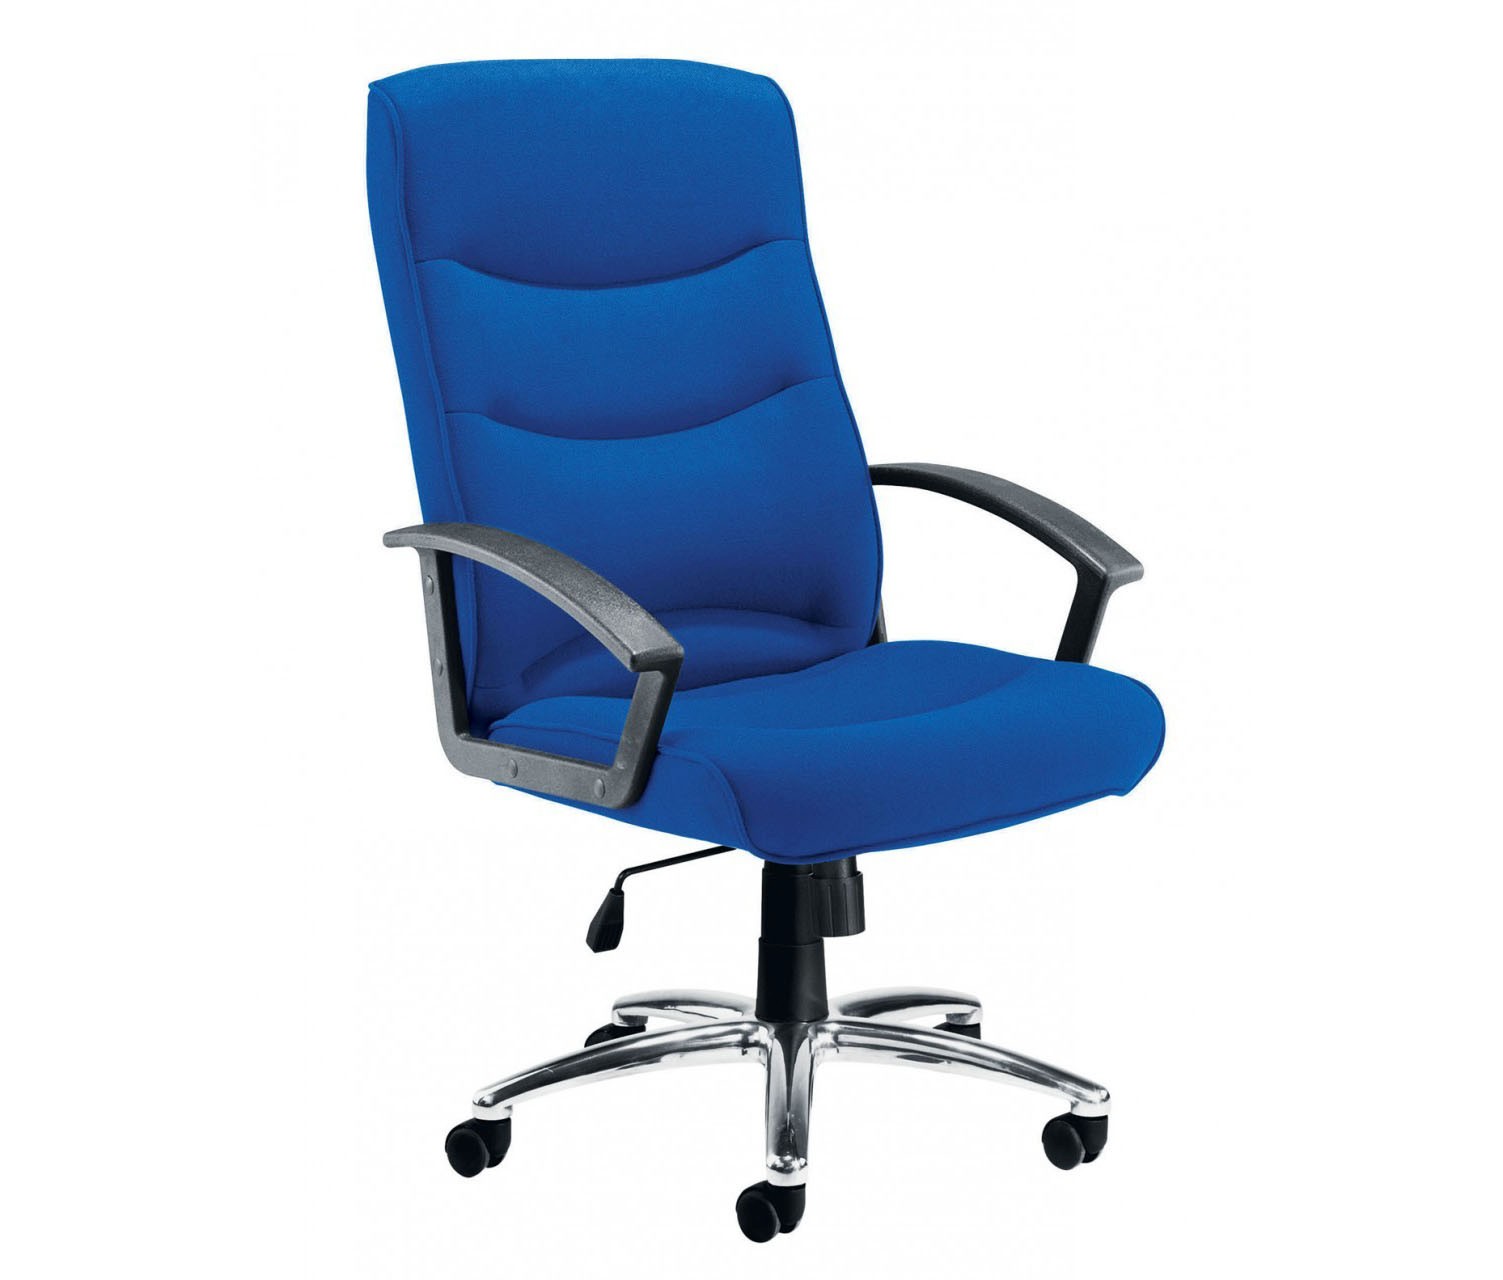 Discount Desks And Chairs Discount Office Furniture Buy